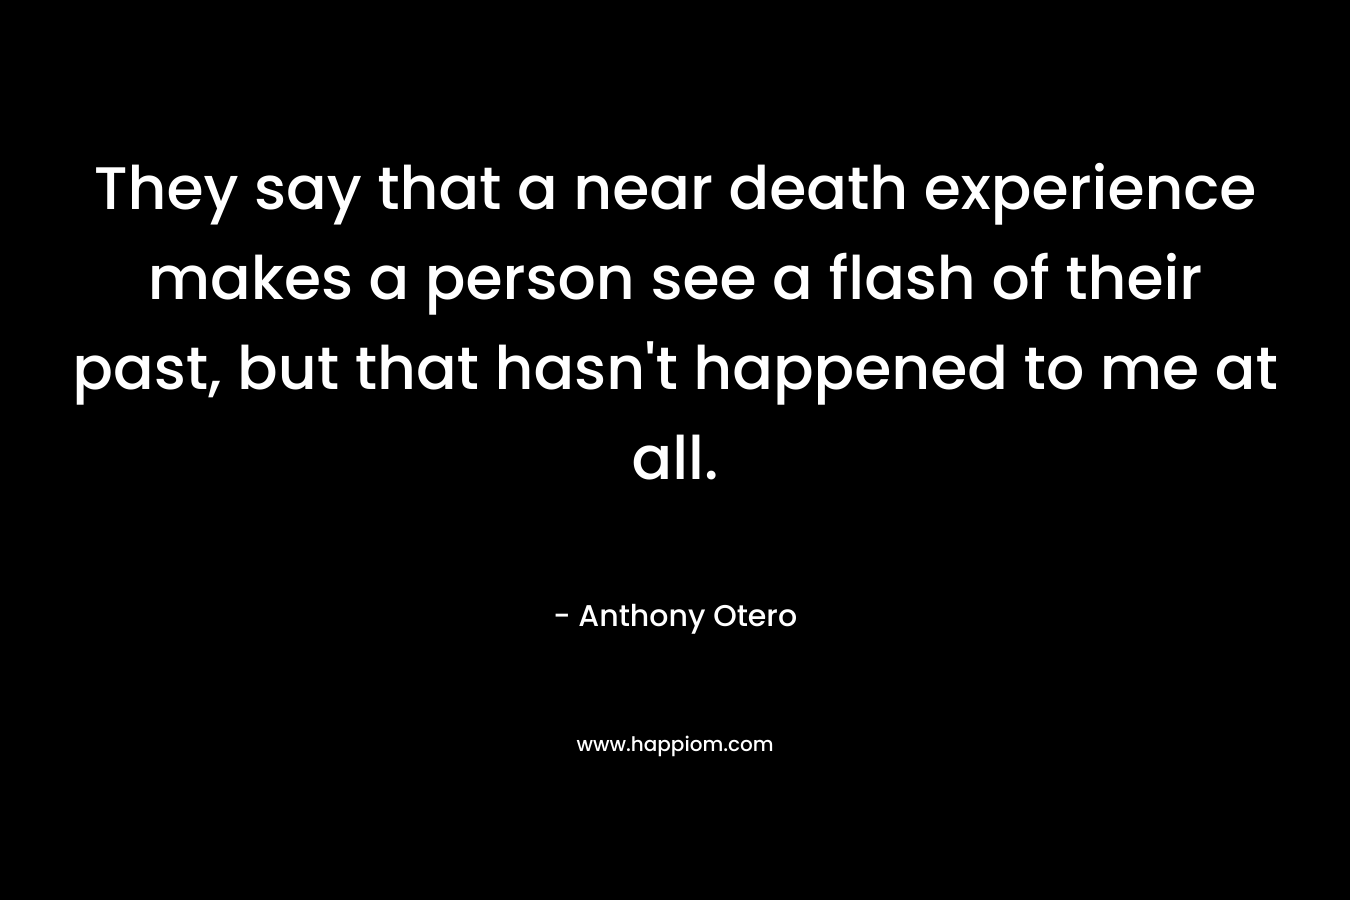 They say that a near death experience makes a person see a flash of their past, but that hasn’t happened to me at all. – Anthony Otero